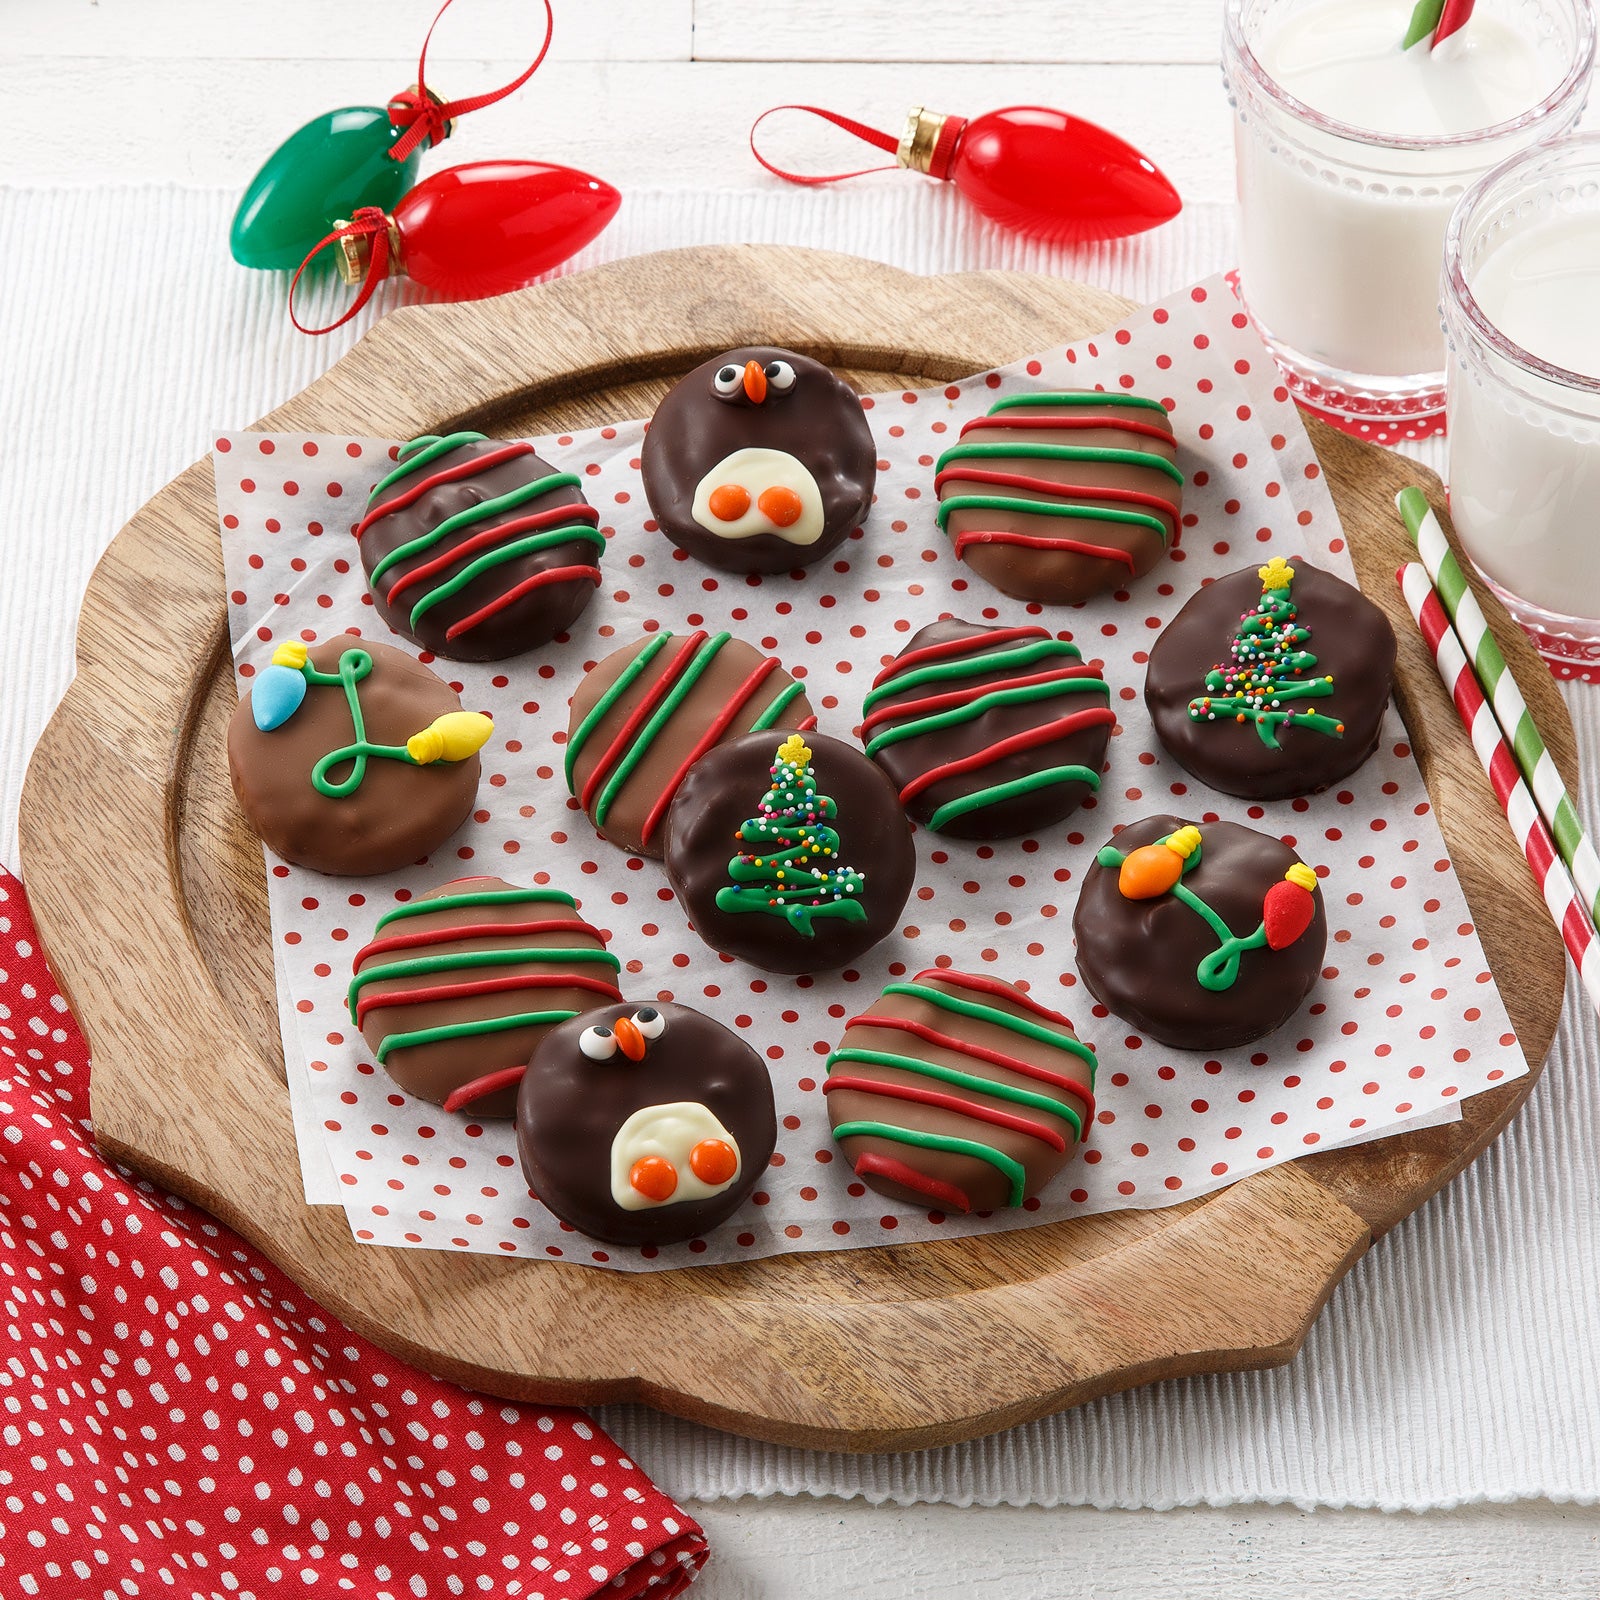 Twelve holiday-decorated chocolate-covered Nibblers®